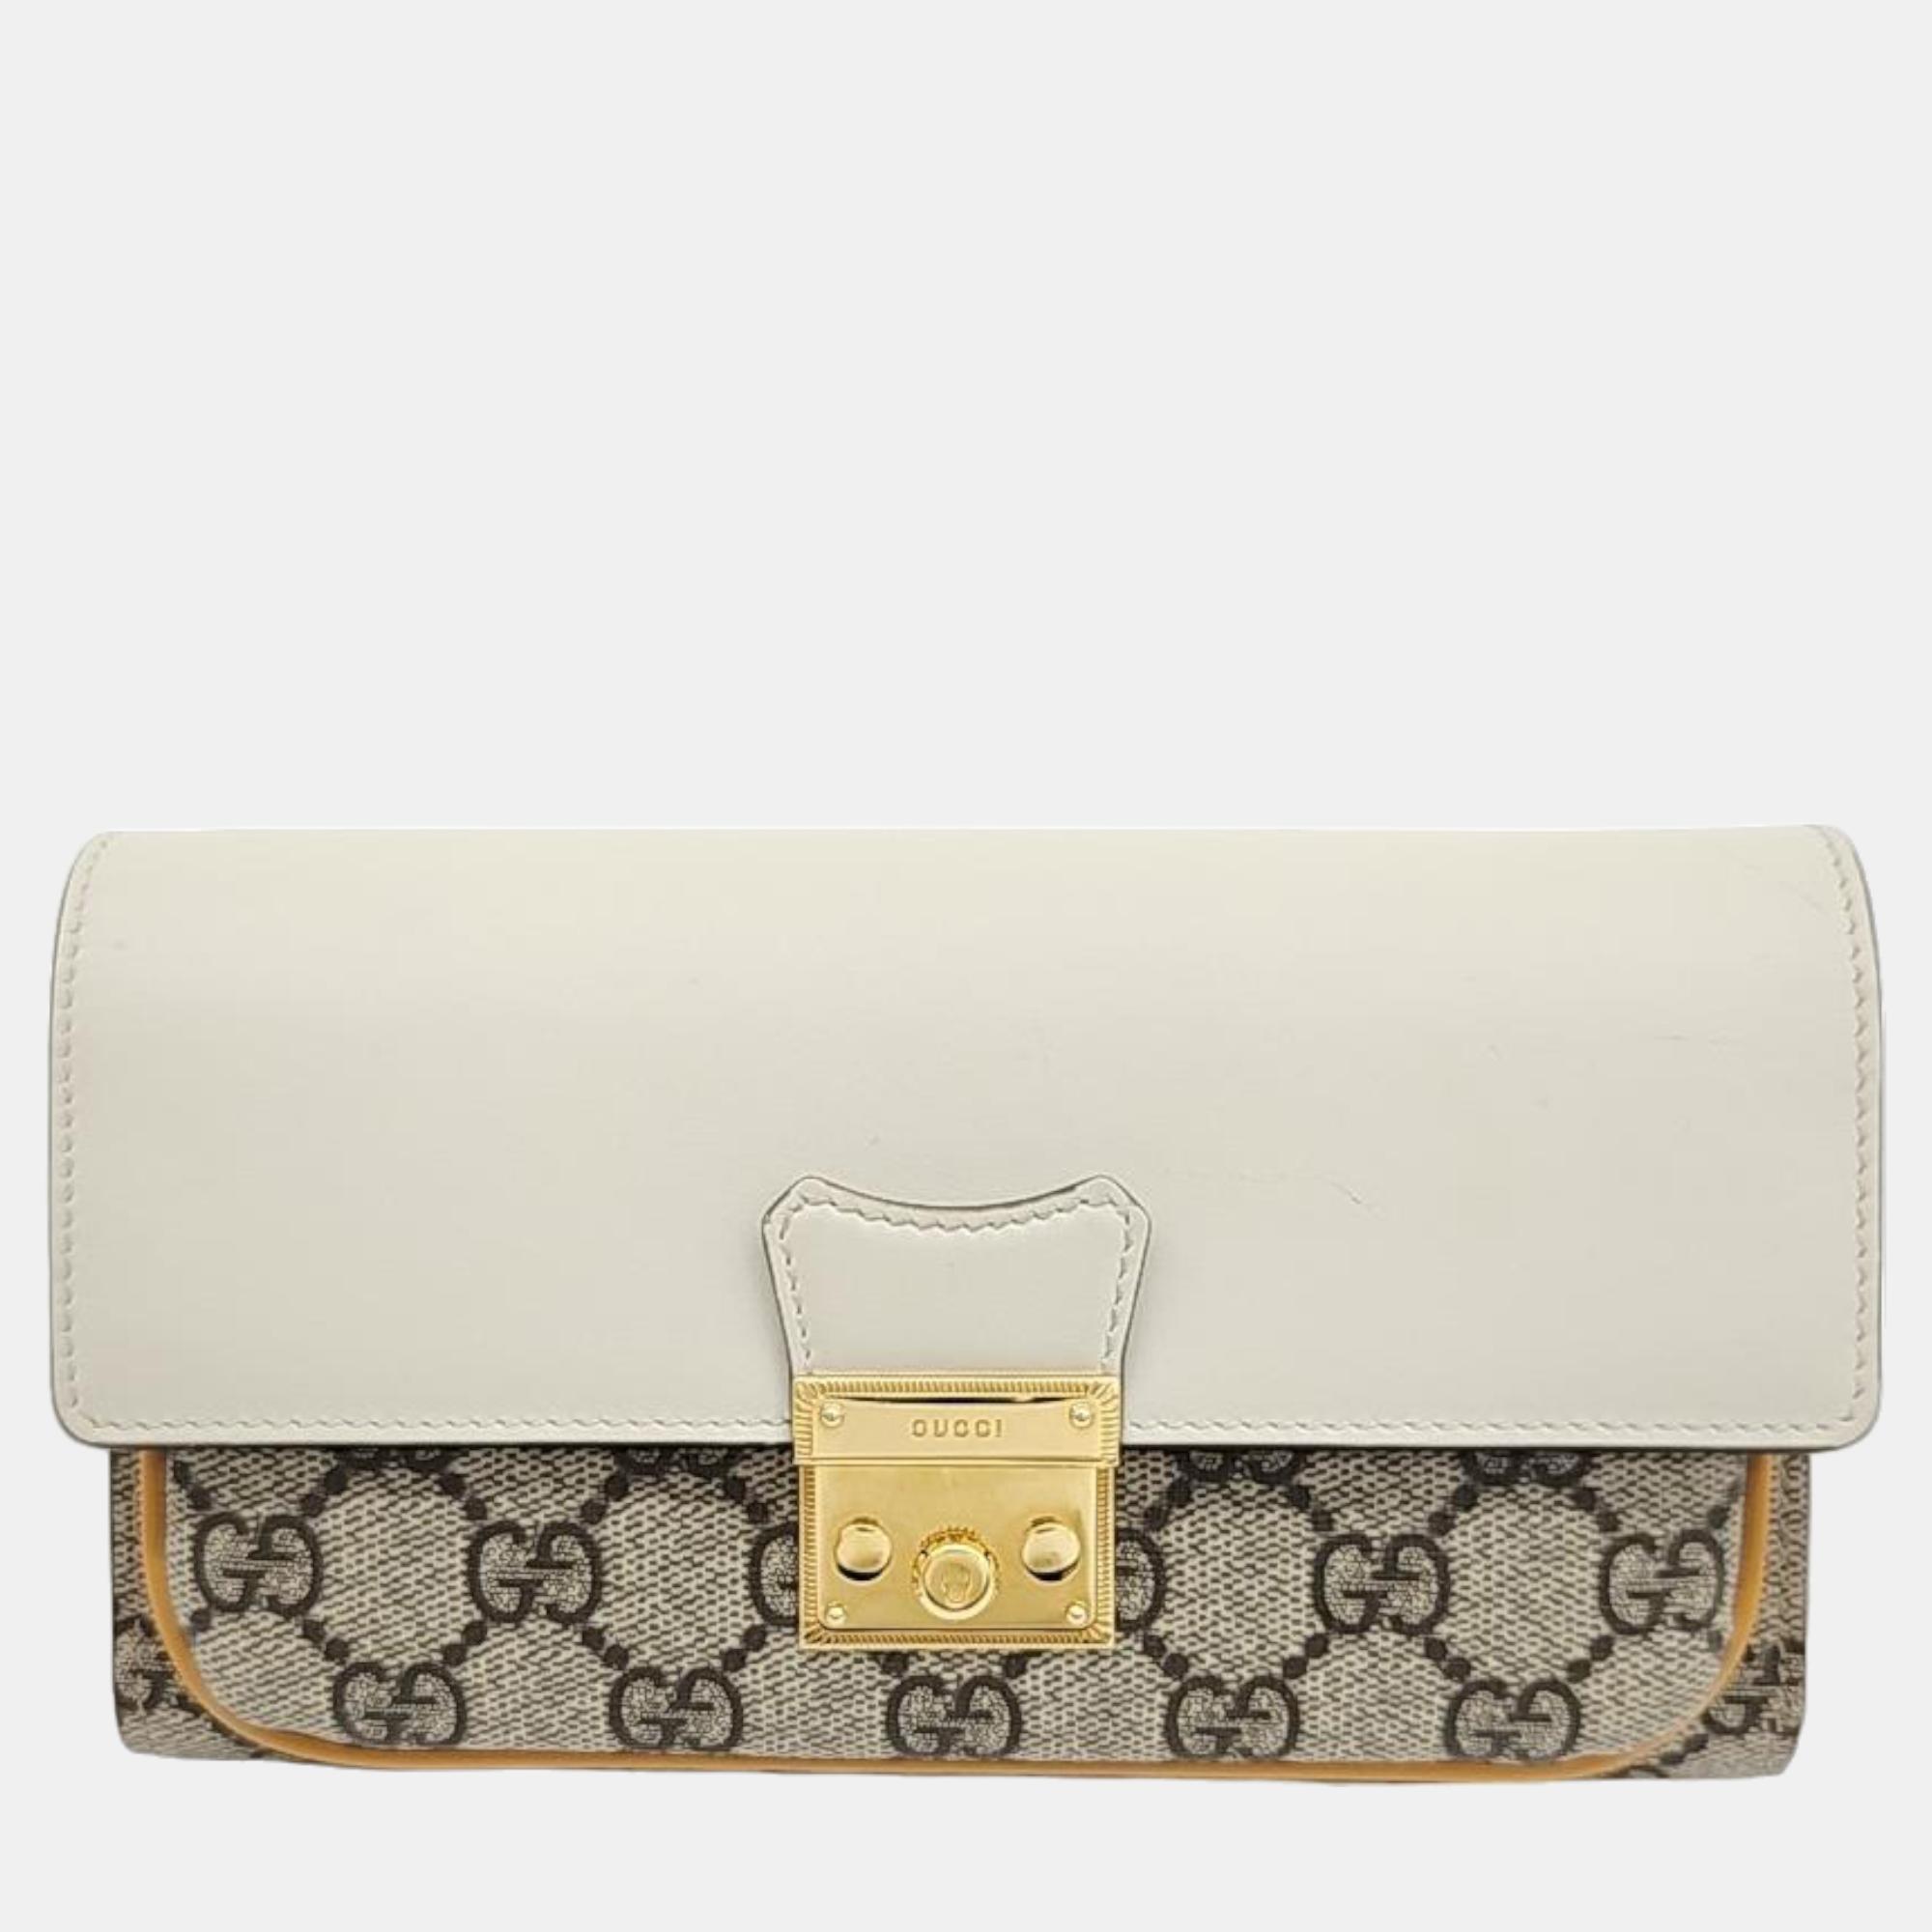 Gucci ivory/beige/mustard gg canvas and leather padlock mini chain crossbody bag